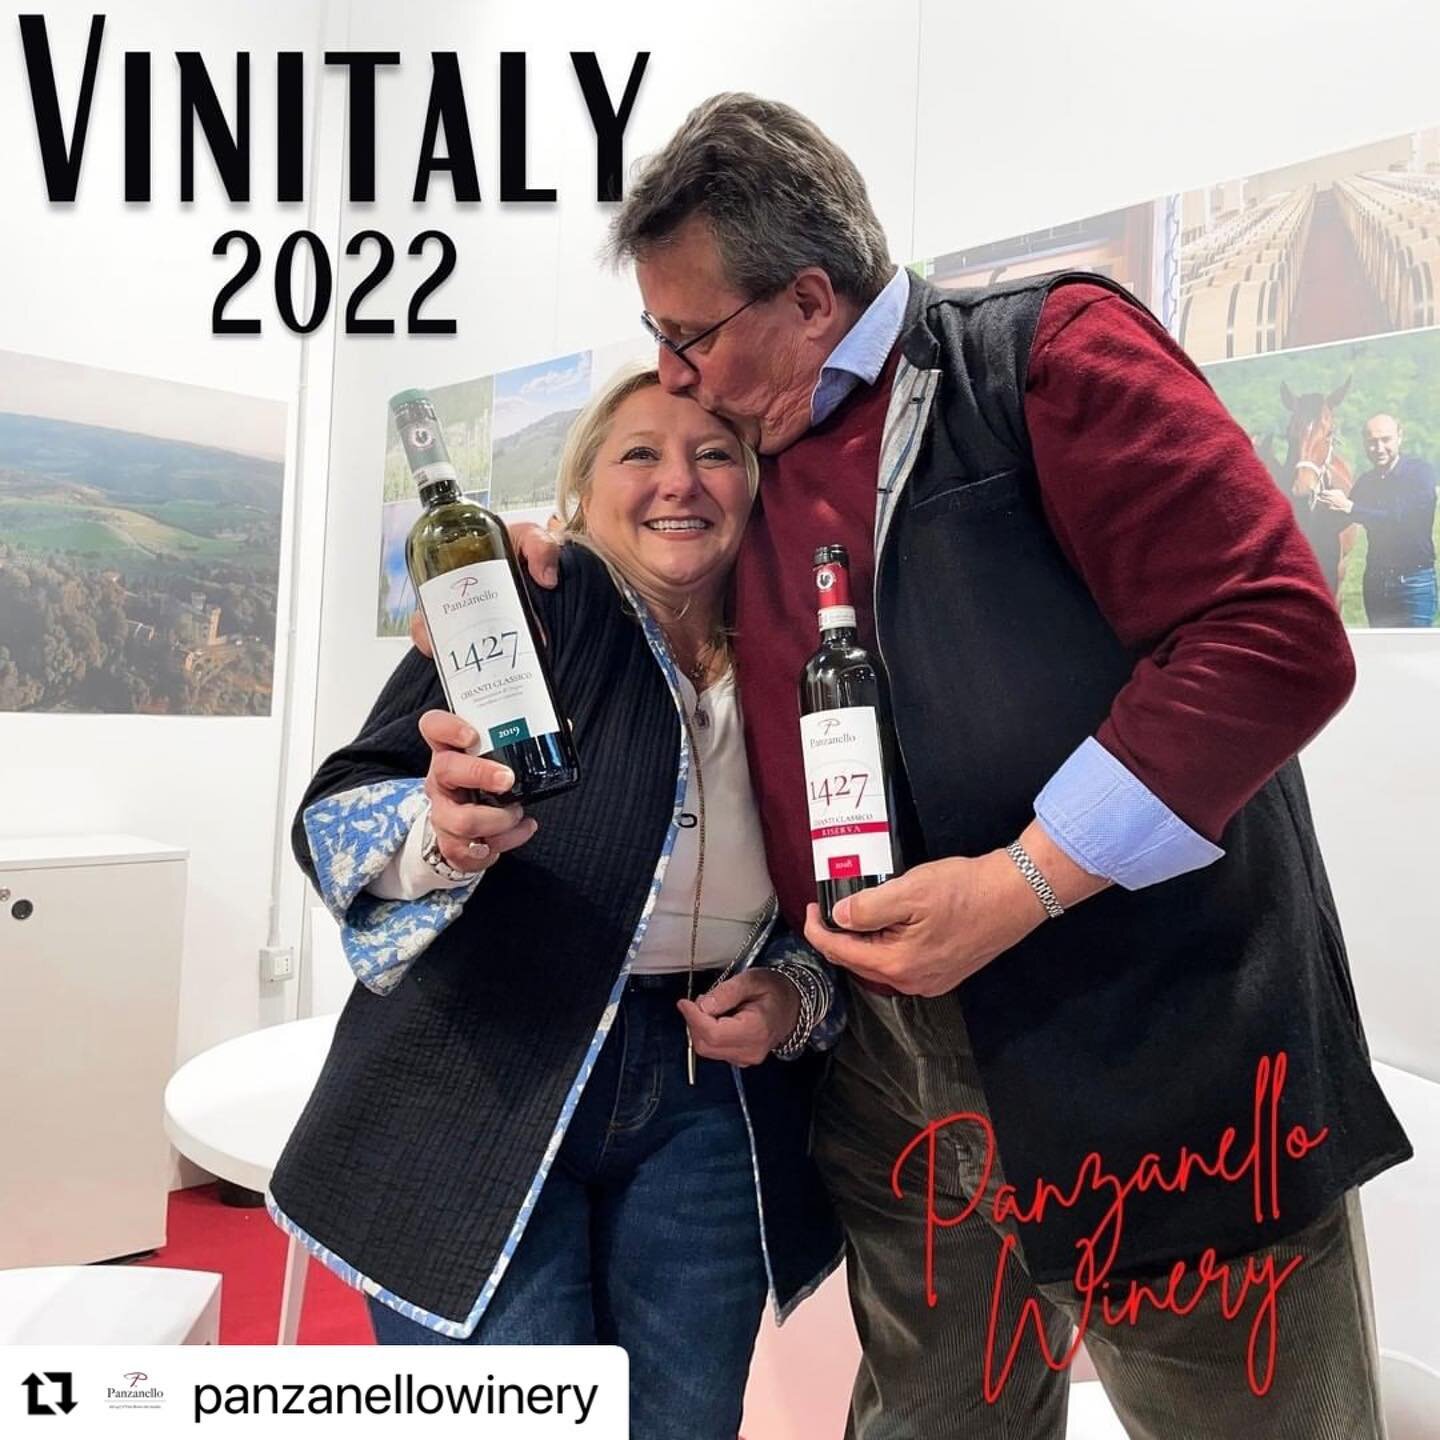 #Repost @panzanellowinery with @make_repost
・・・
Veronafiere, together with Vinitaly and with the contribution of all of you! 🍷
Thank you ❤️

📌 Contact us
www.panzanello.it
Telefono: +39 055 852470
Mobile: +39 3351211952
Email: info@panzanello.it

#